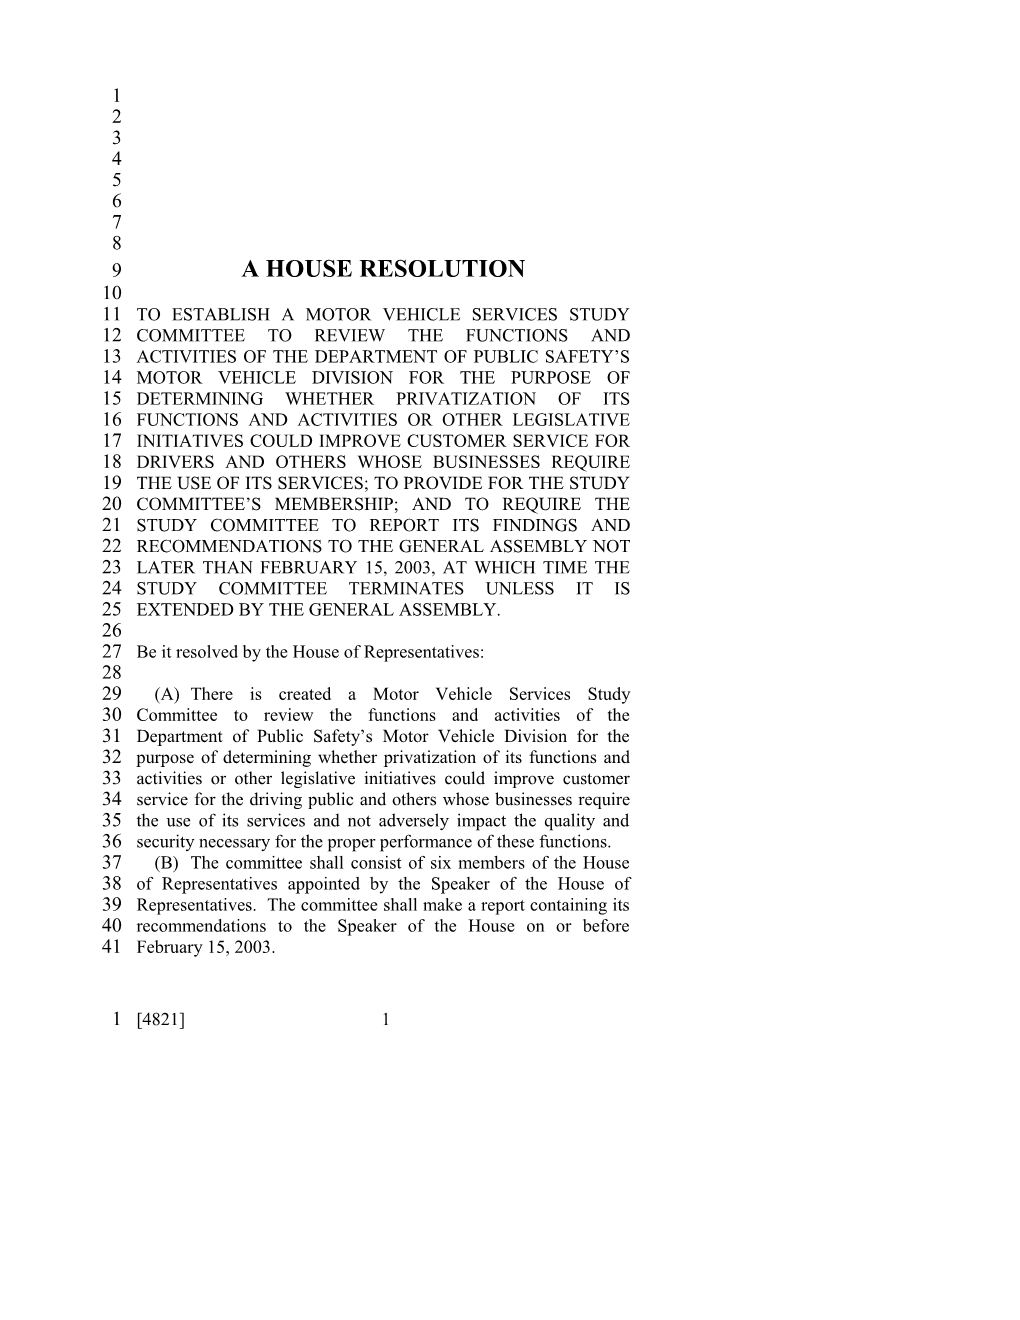 2001-2002 Bill 4821: Motor Vehicle Division Privatization, Motor Vehicle Services Study